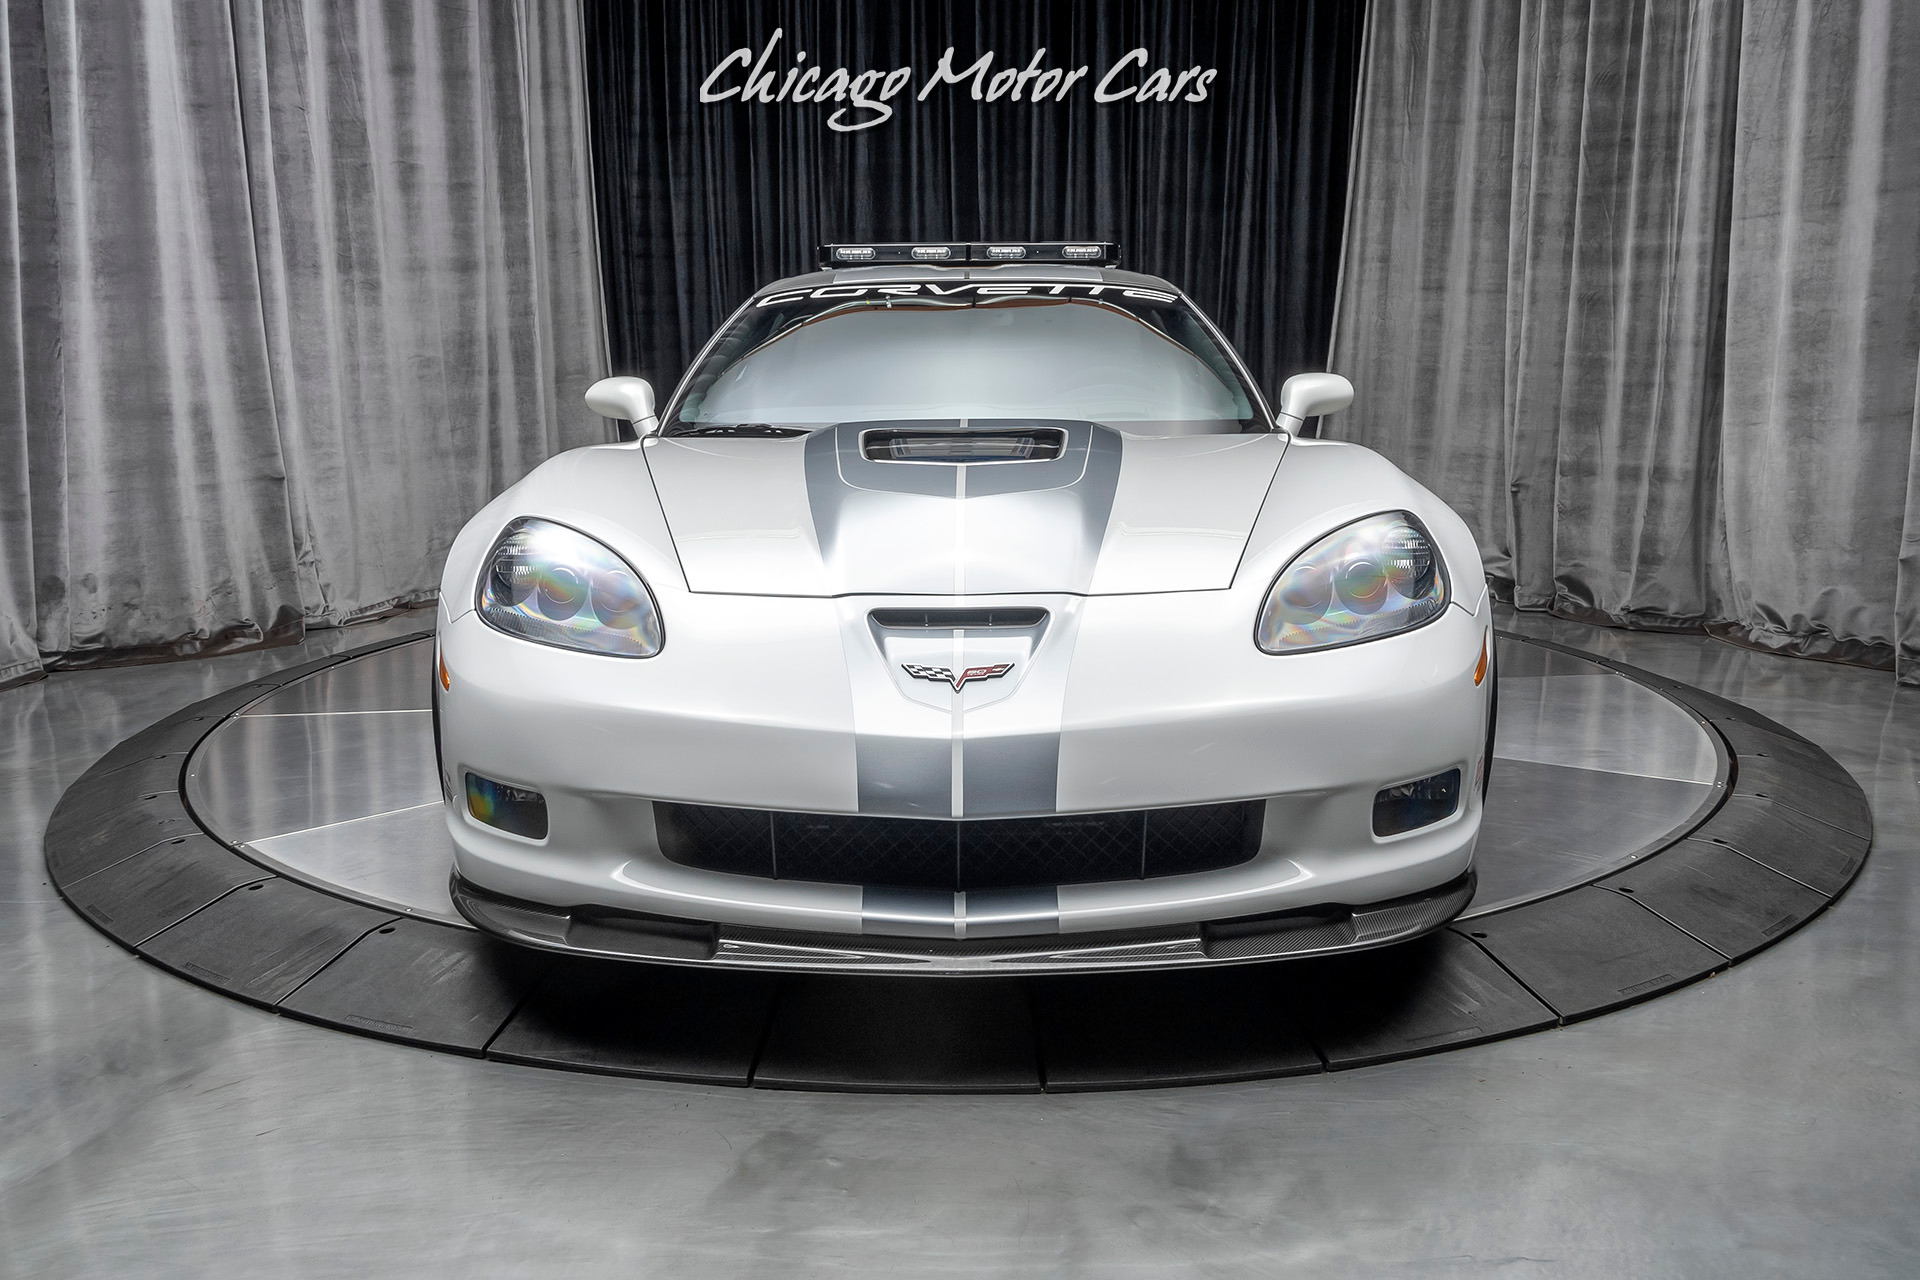 Used-2013-Chevrolet-Corvette-ZR1-3ZR-TRIBUTE-PACE-CAR-Only-1200-Miles